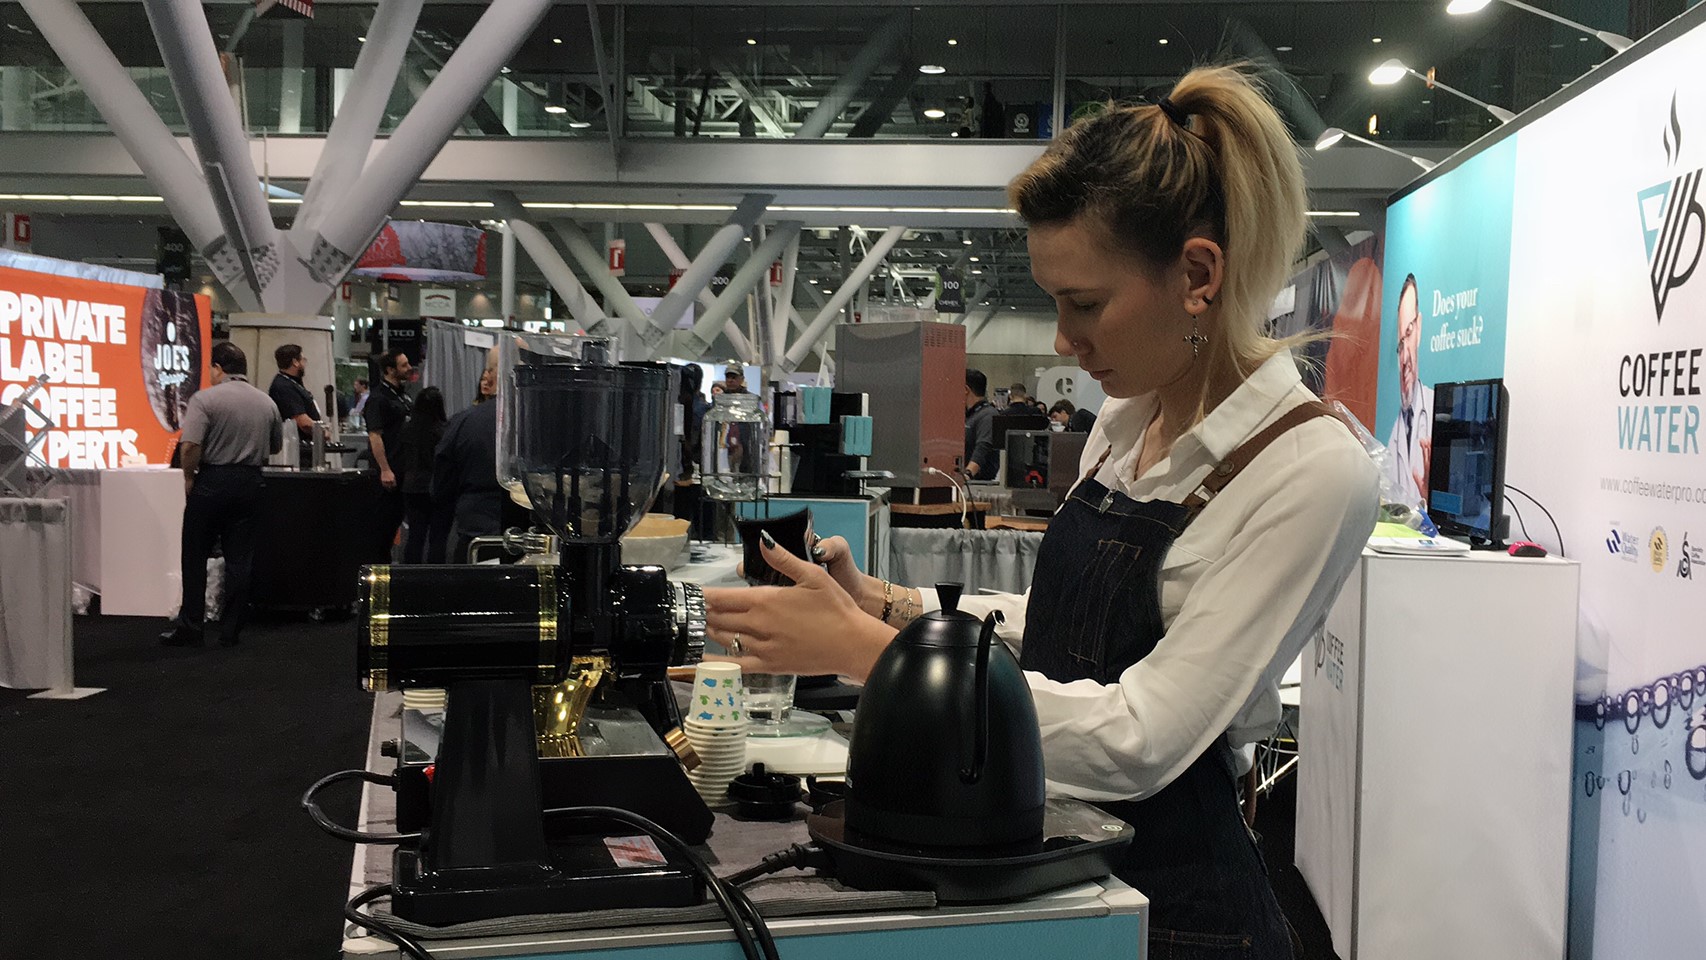 Introducing COFFEE WATER at the Specialty Coffee Expo in Boston 2019